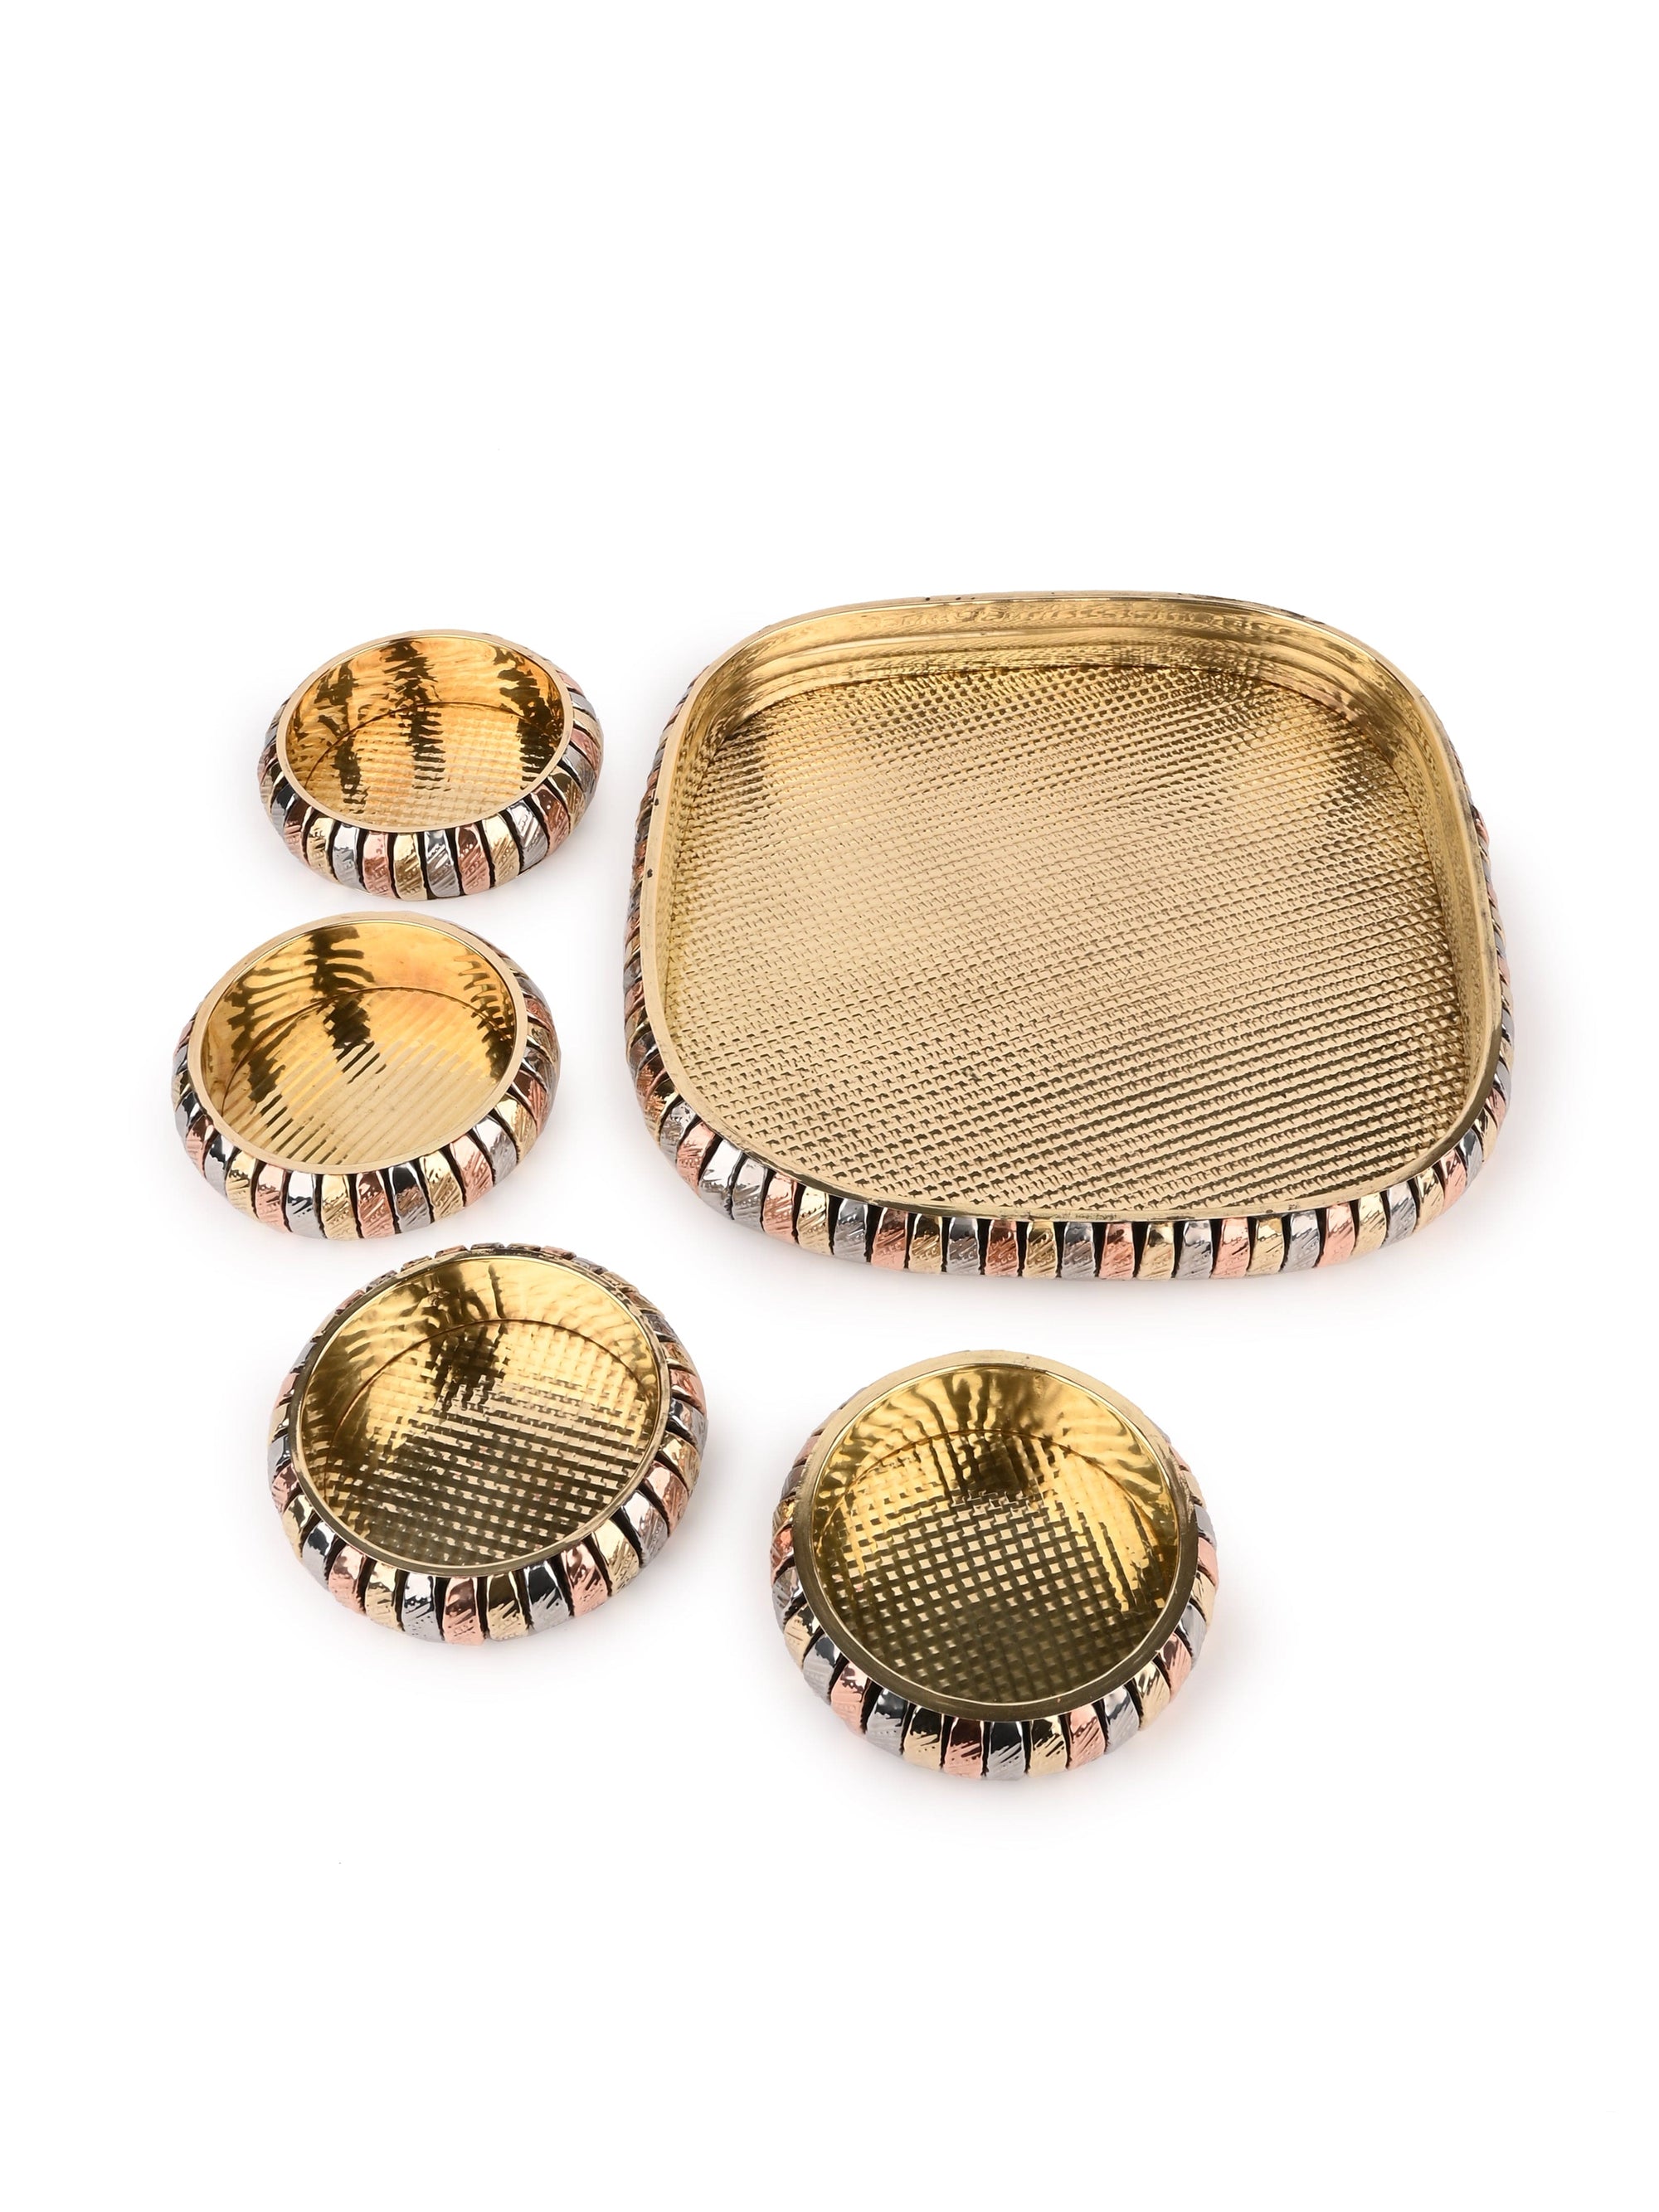 Square Tray with 4 round bowls for serving dry fruits, Copper and Brass crafted